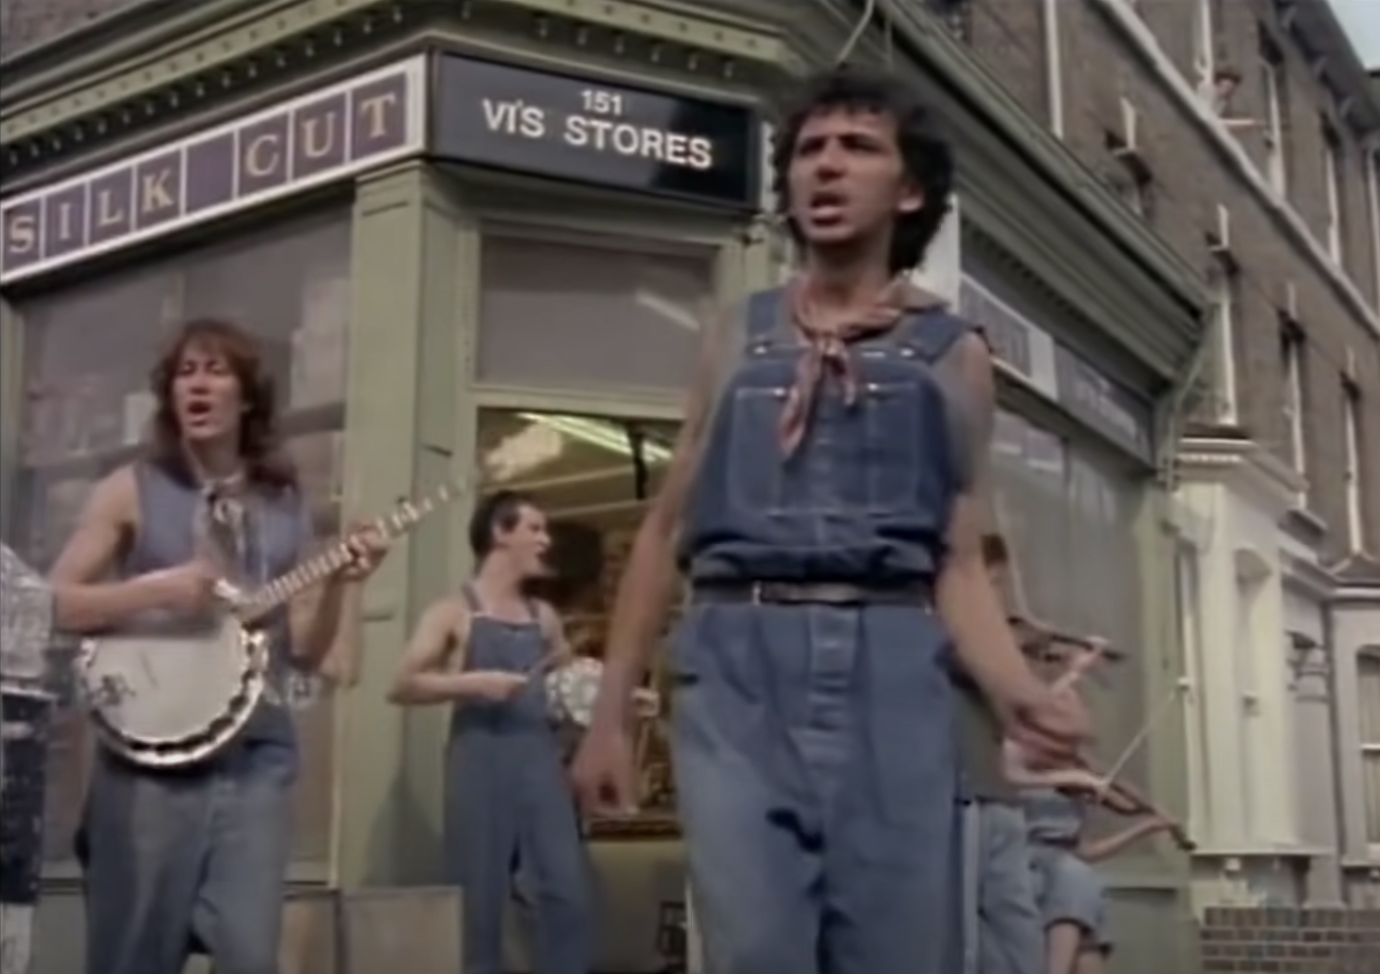 The band in earthy denim performing on banjo and violin in the video